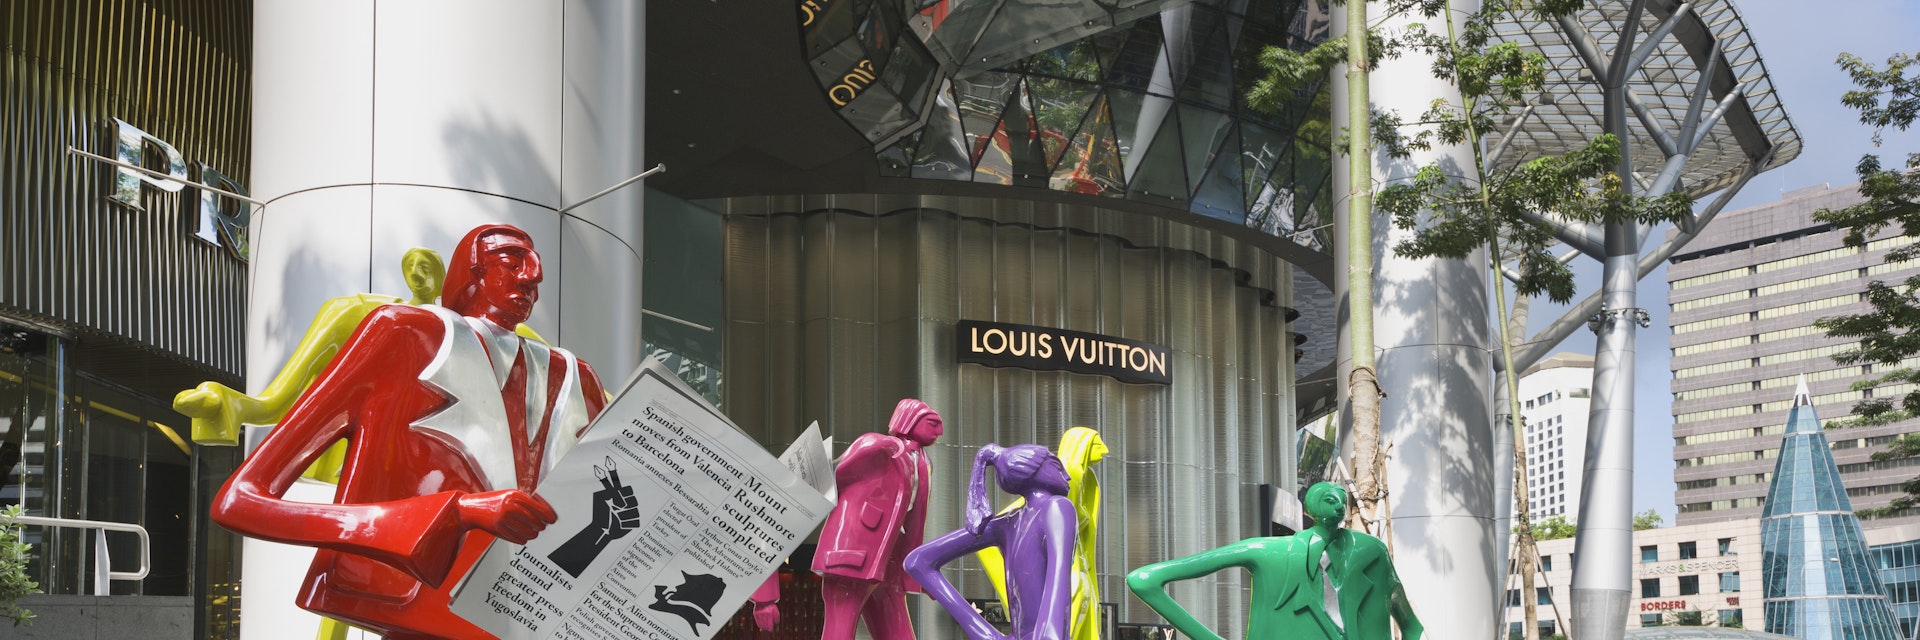 Singapore, Figurine at ION Orchard (Photo by: JTB Photo/UIG via Getty Images)